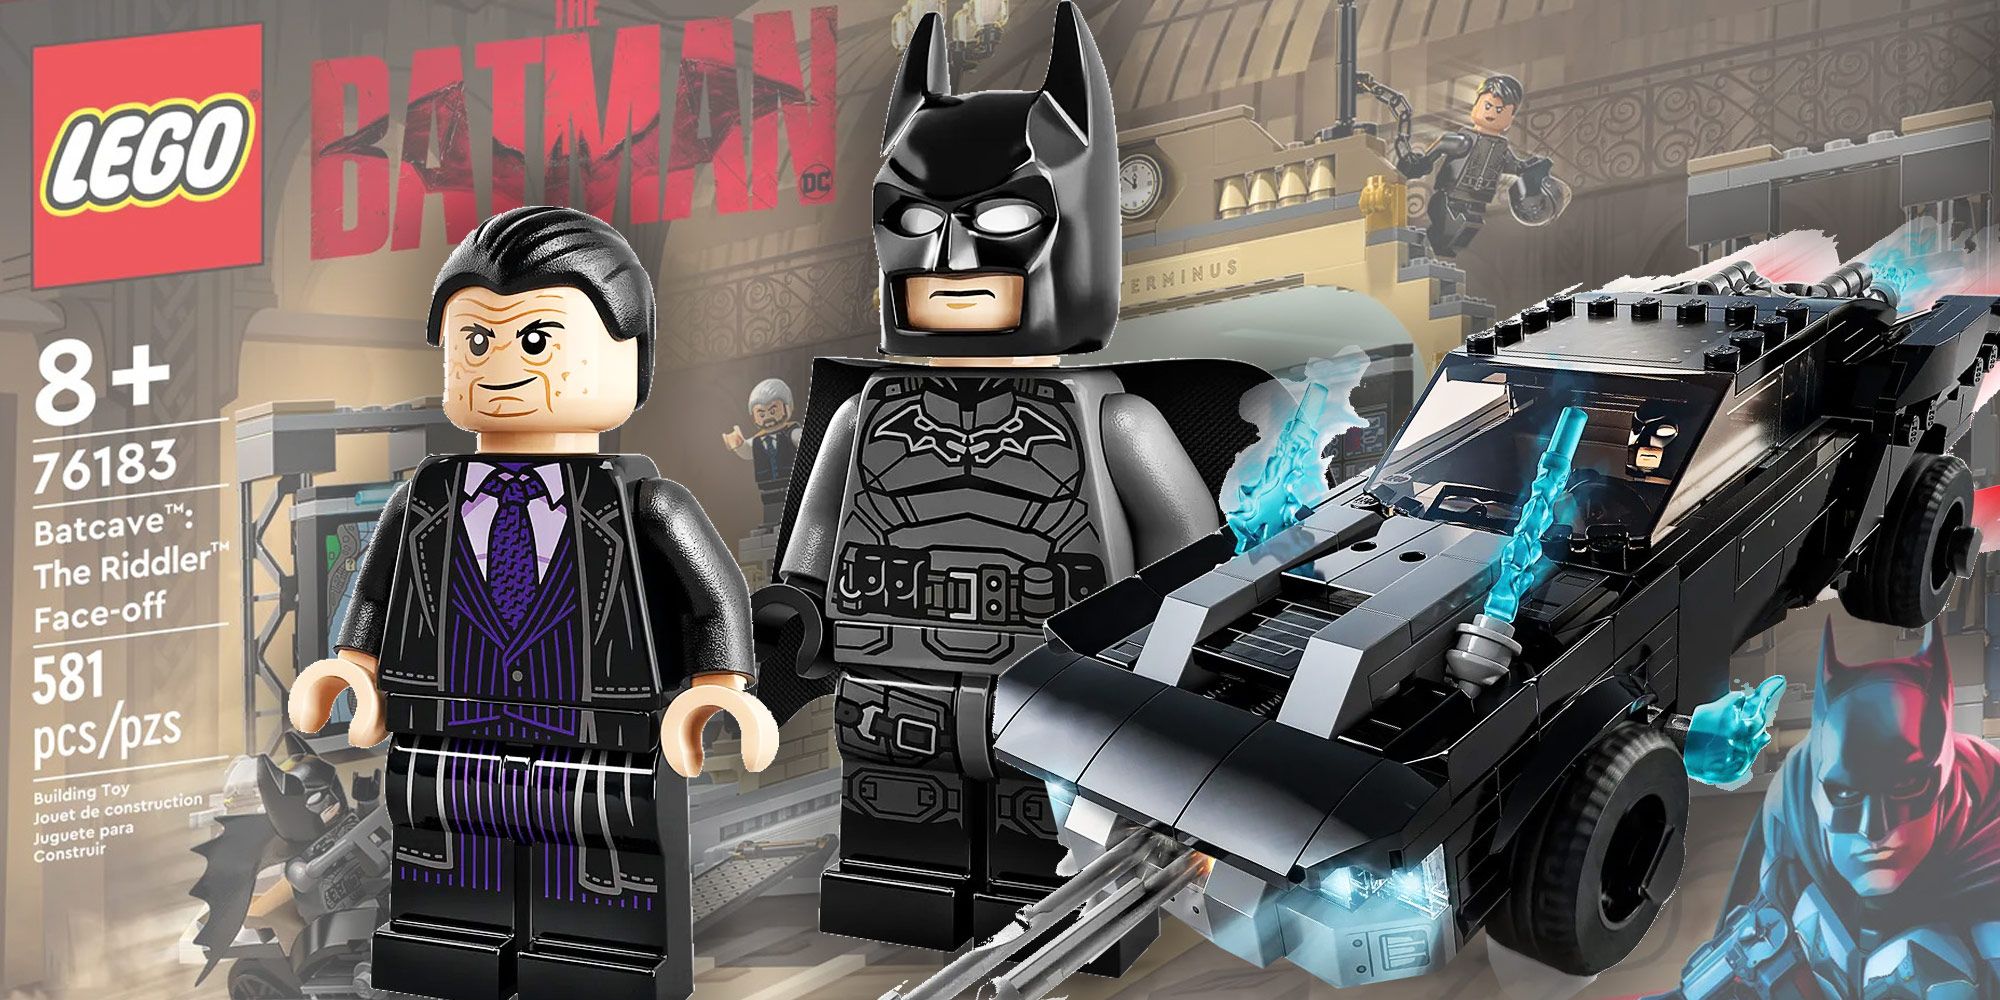 So Since yesterday Lego revealed the new The Batman sets and